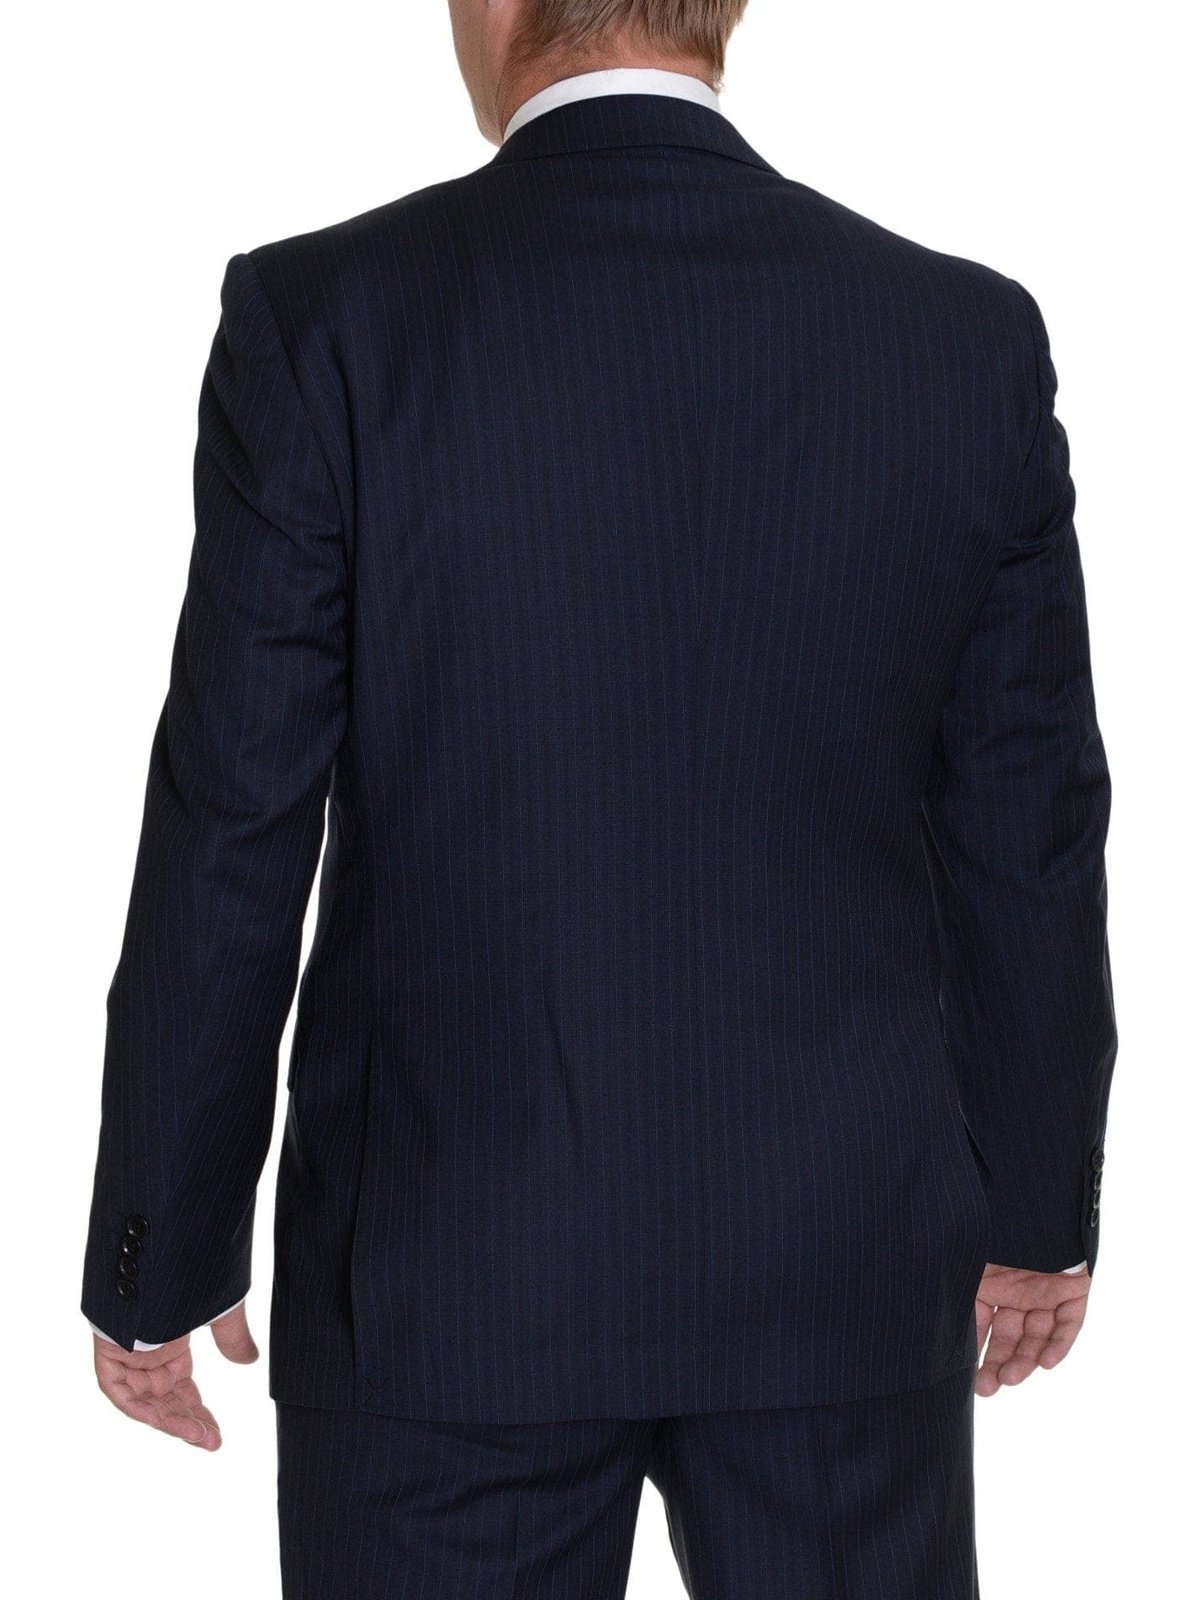 Modern Fit Navy Blue Pinstriped Two Button Wool Suit - The Suit Depot